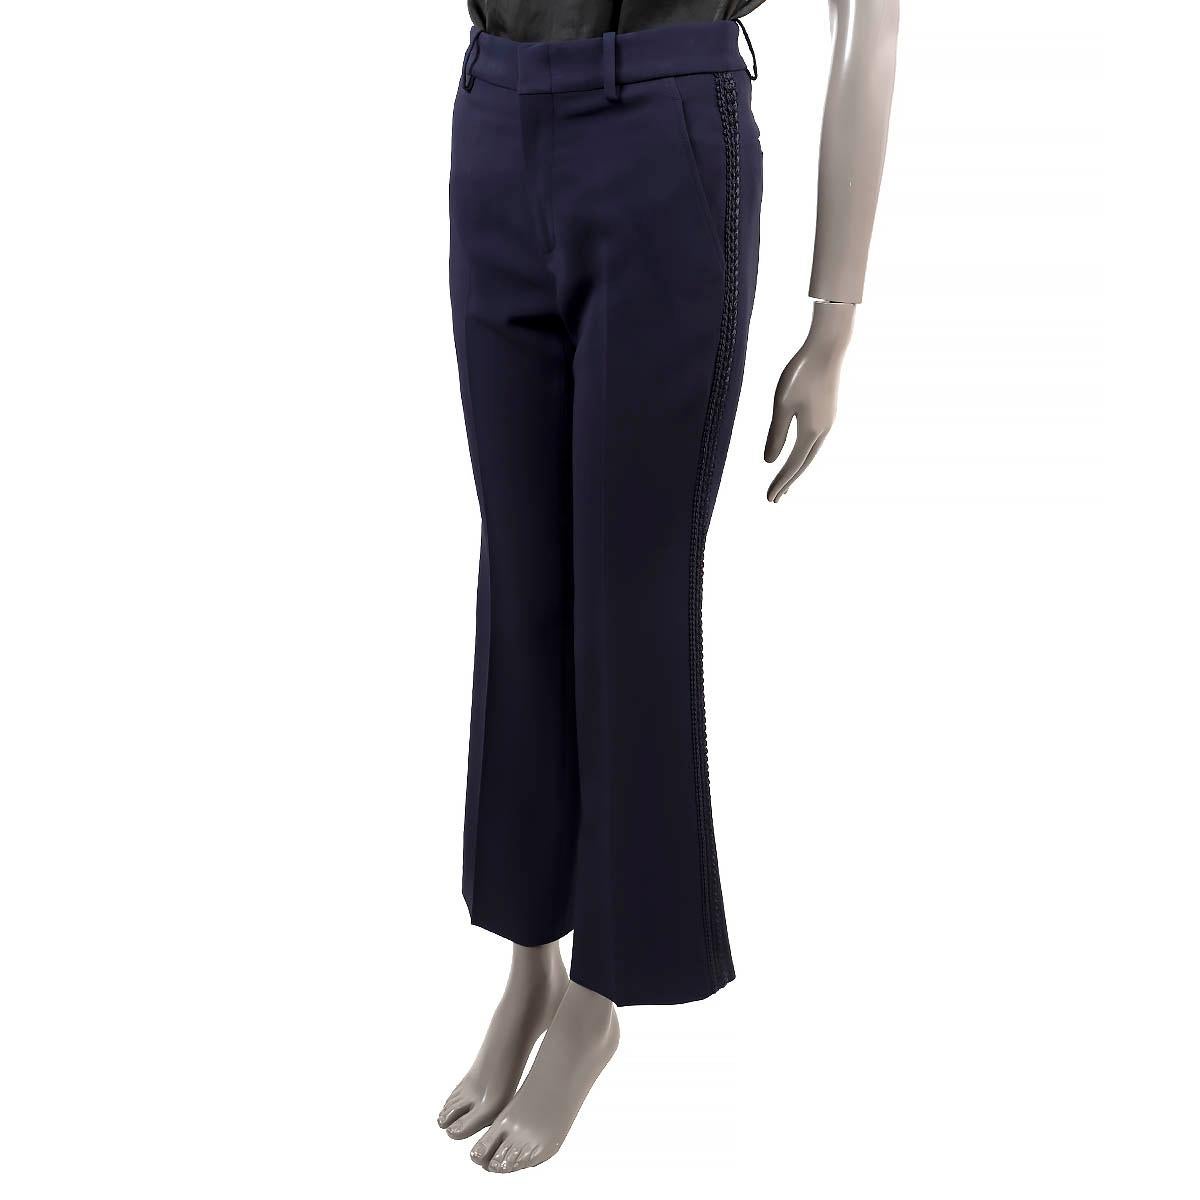 100% authentic Gucci passementrie trim stretch cady pants in navy blue acetate (69%), cotton (19%) and polyester (8%). Feature belt loops and two slit pockets on the sides and two slit pockets on the back. Open with one hook and a zipper on the